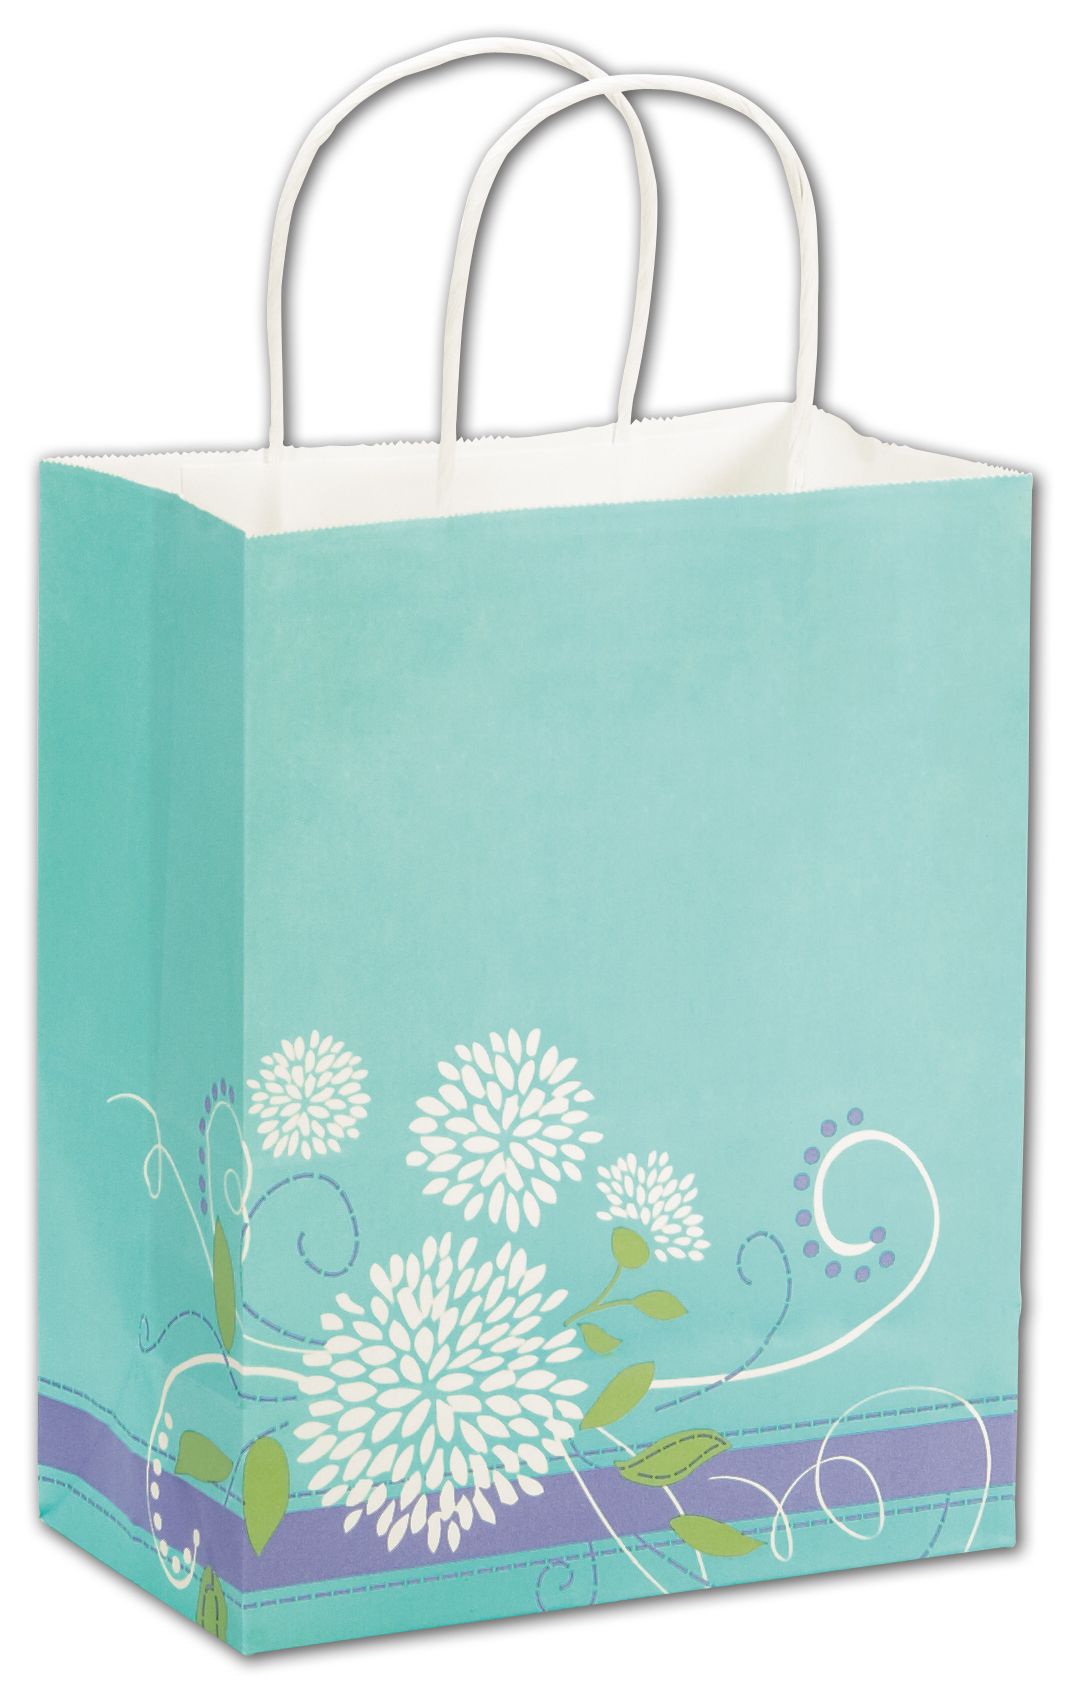 These delicate beautiful shopping bags are ideal for gift giving or purchases. Perfect for florists.